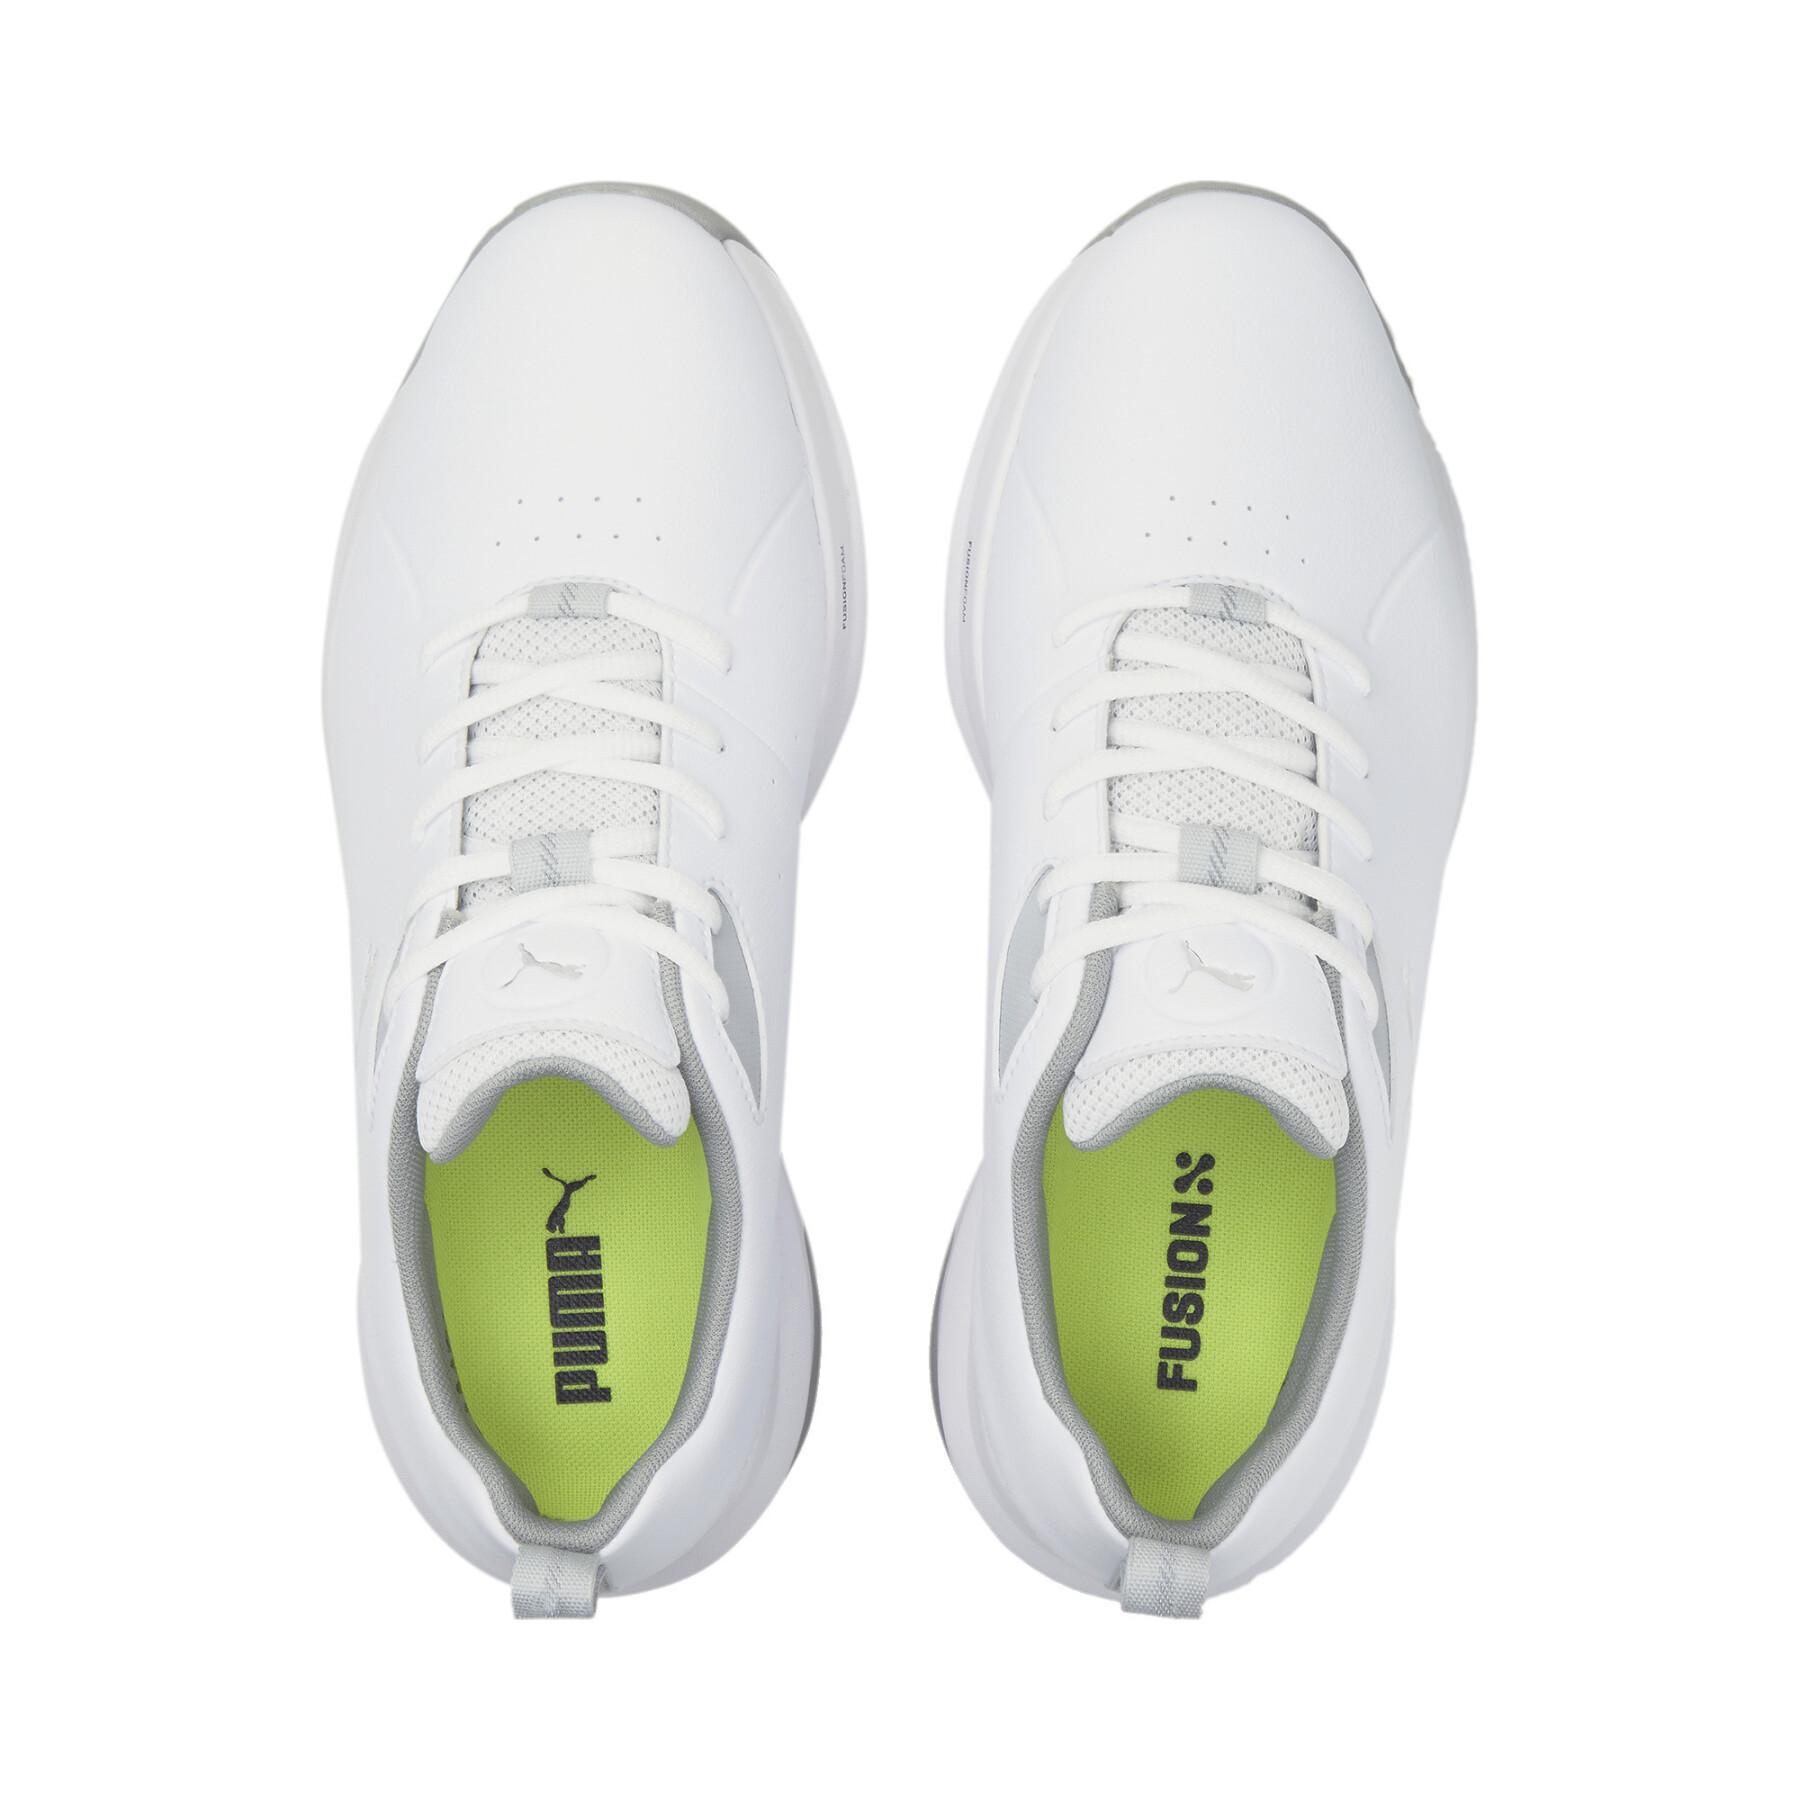 Golf shoes with spikes Puma Fusion FX Tech